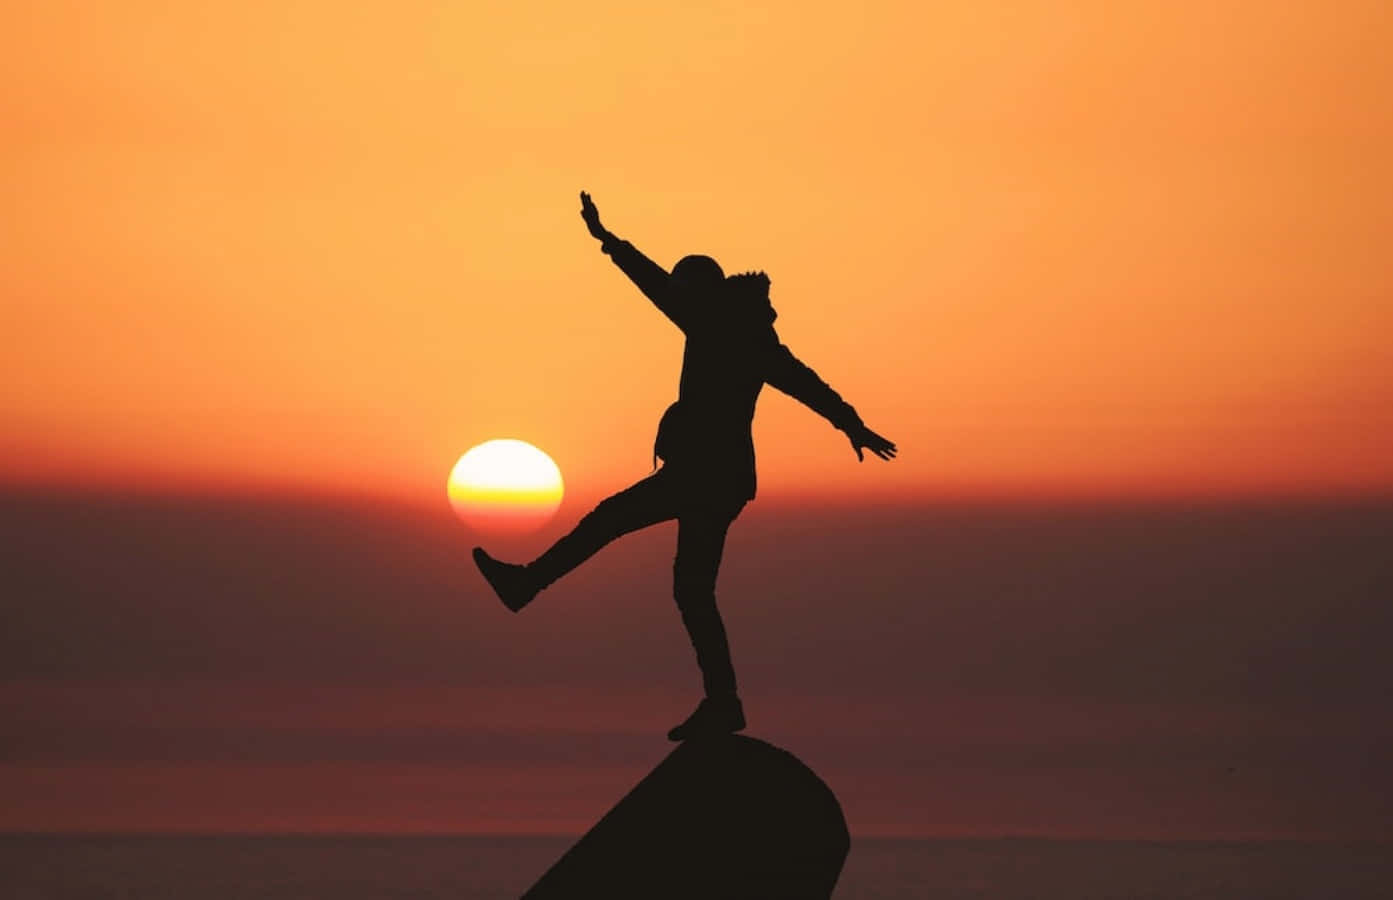 Silhouette Of A Woman Jumping On Top Of A Rock At Sunset